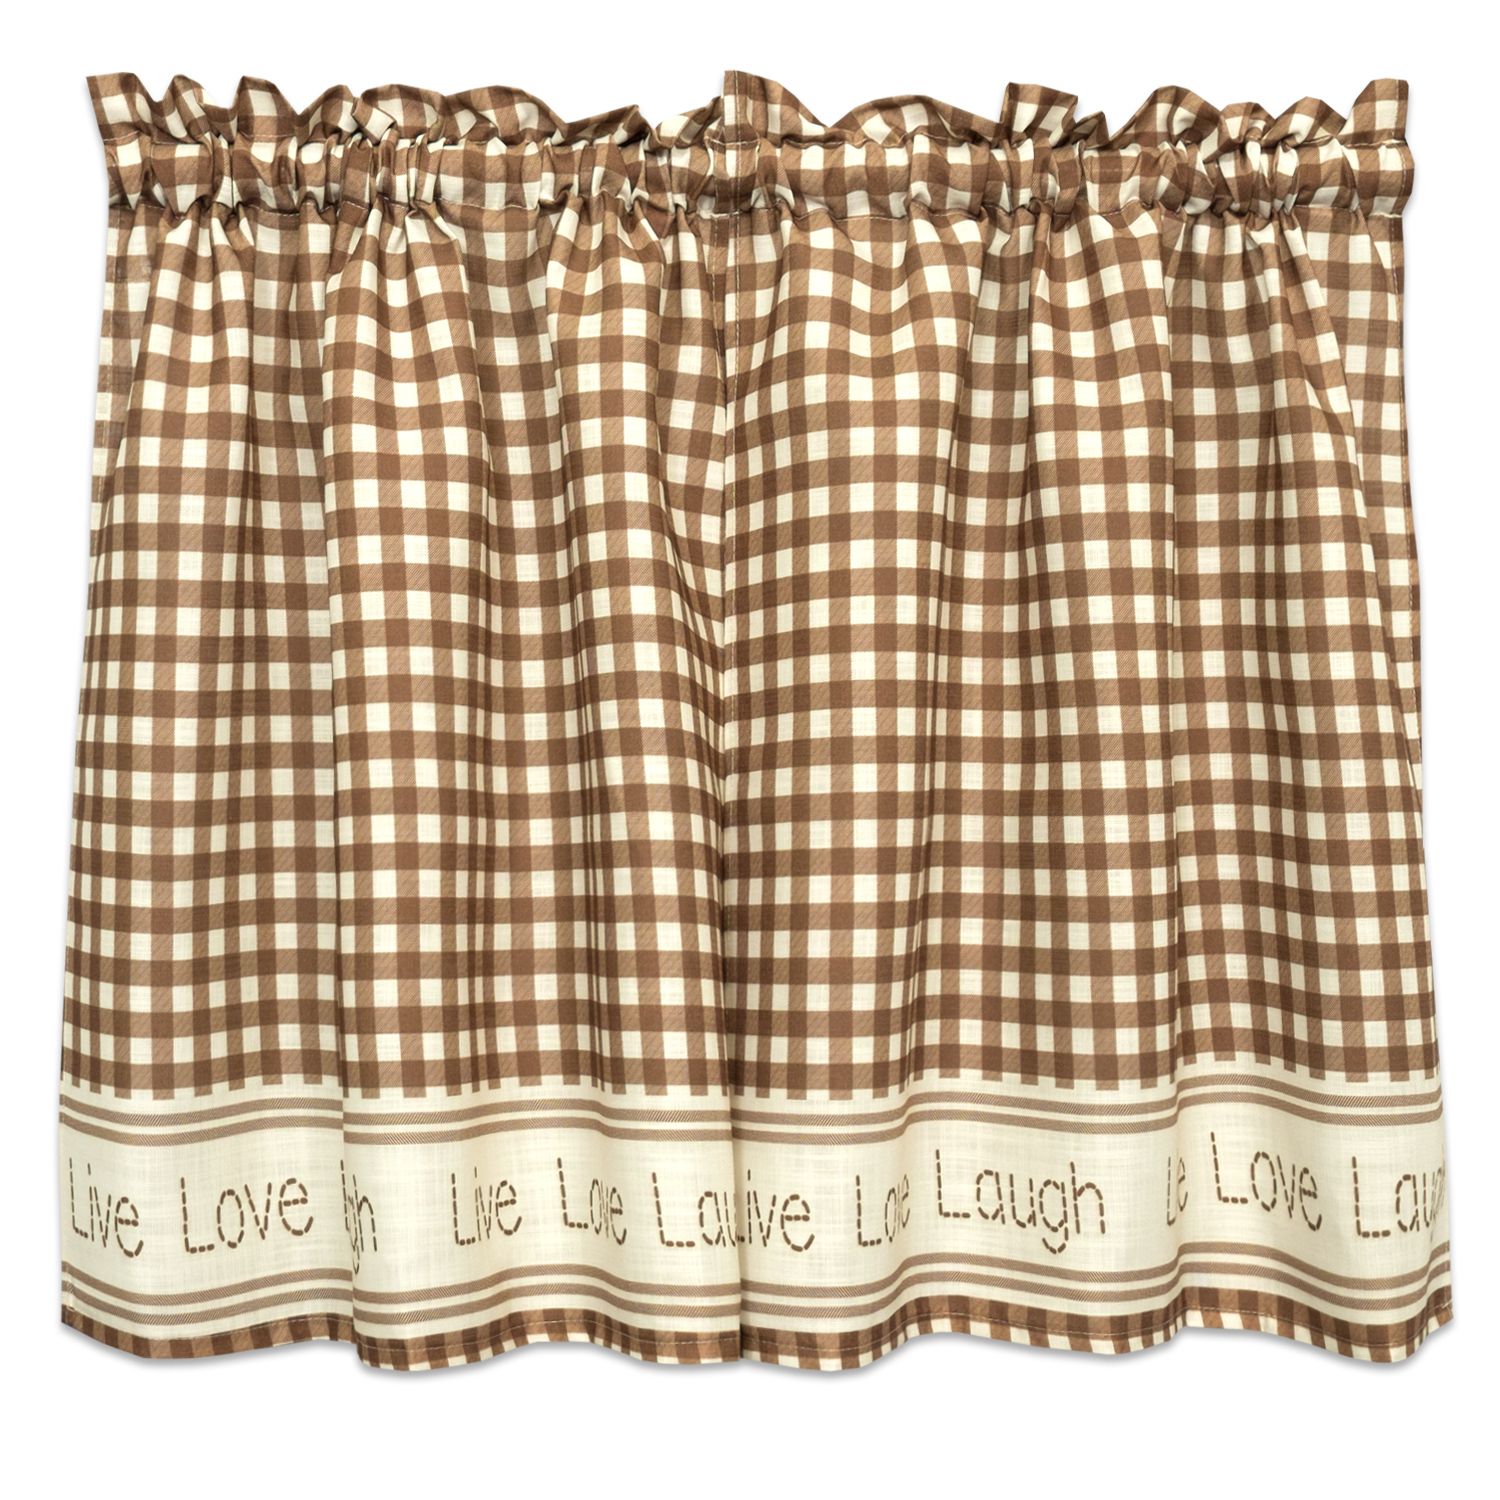 Gingham Stitch Live Laugh Love Kitchen Curtain Tier Pair Or Valance Toast For Live, Love, Laugh Window Curtain Tier Pair And Valance Sets (View 4 of 20)